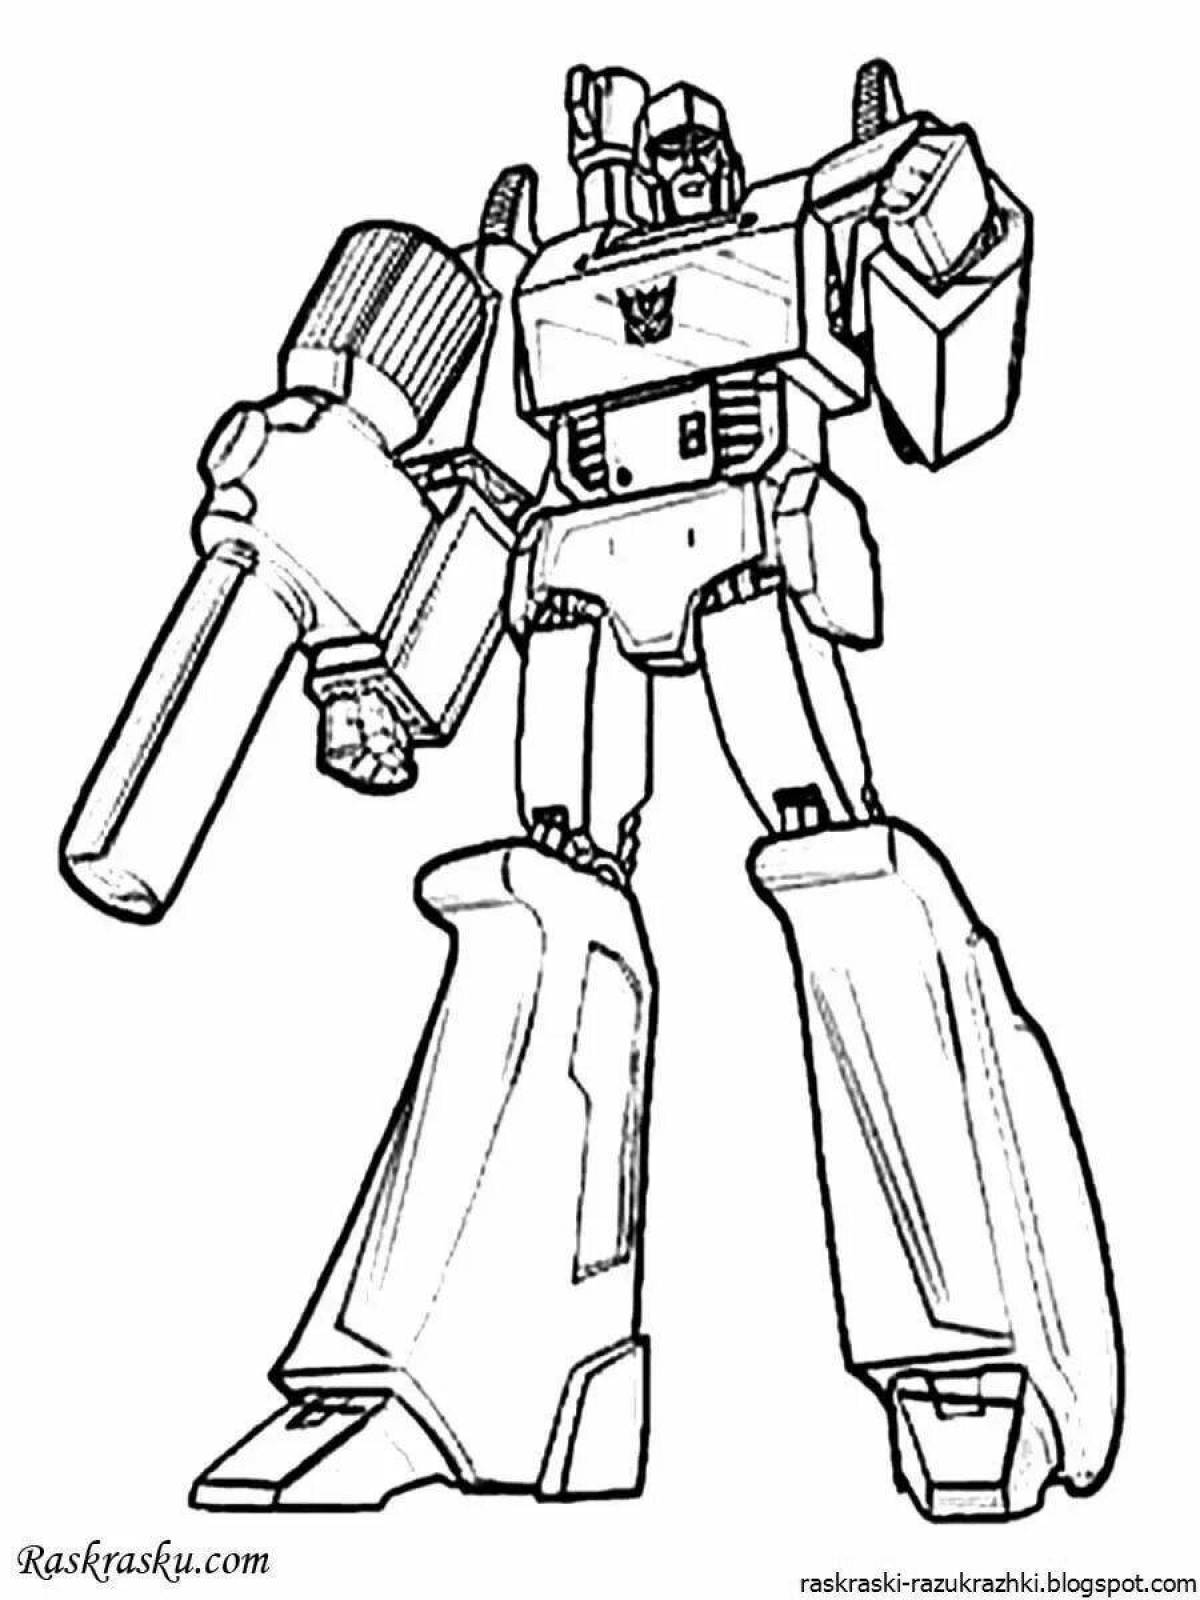 Colorful cool robot coloring page for boys